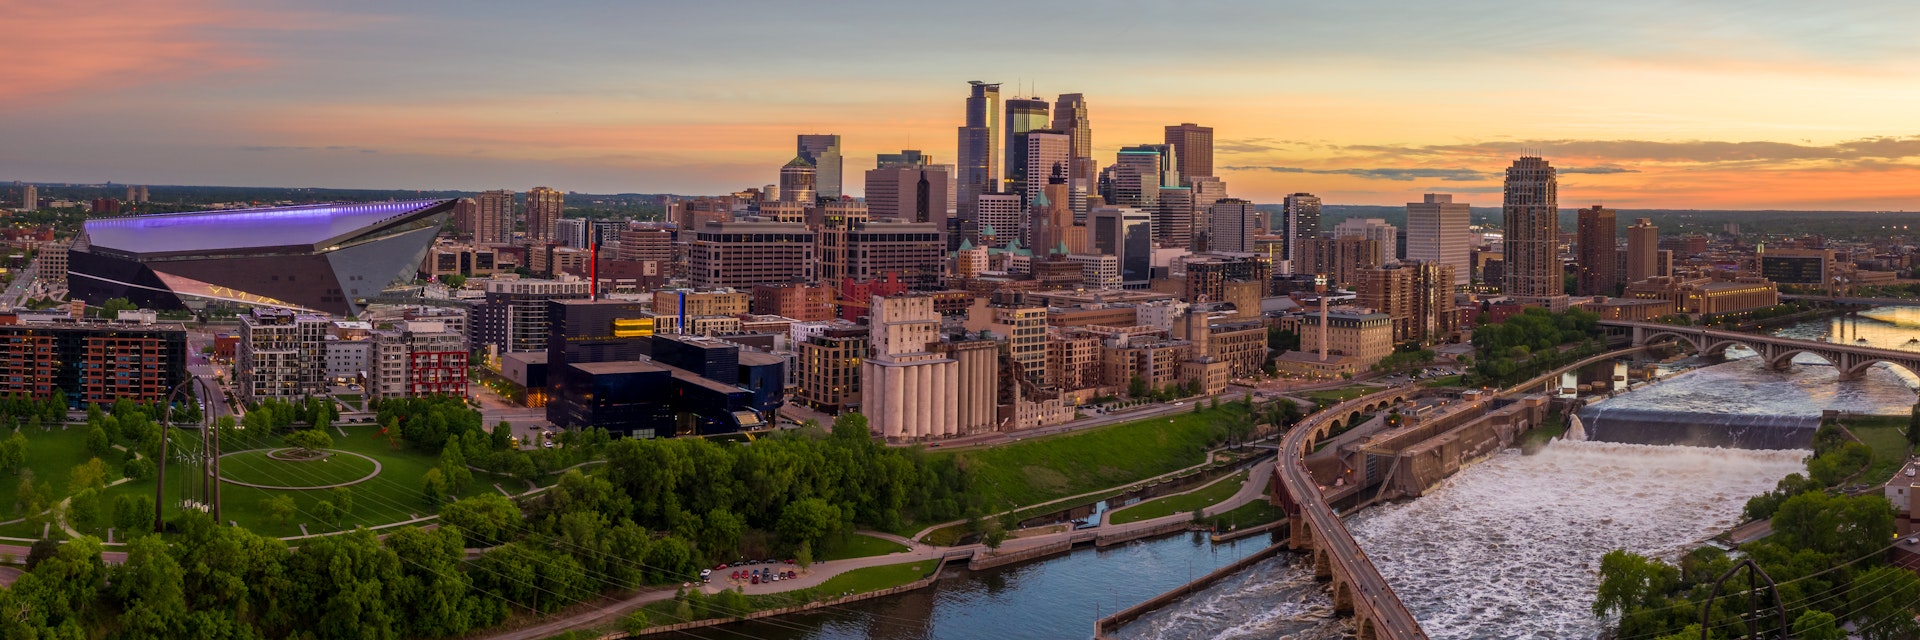 Aerial view of Minneapolis and St. Anthony Falls at dusk 